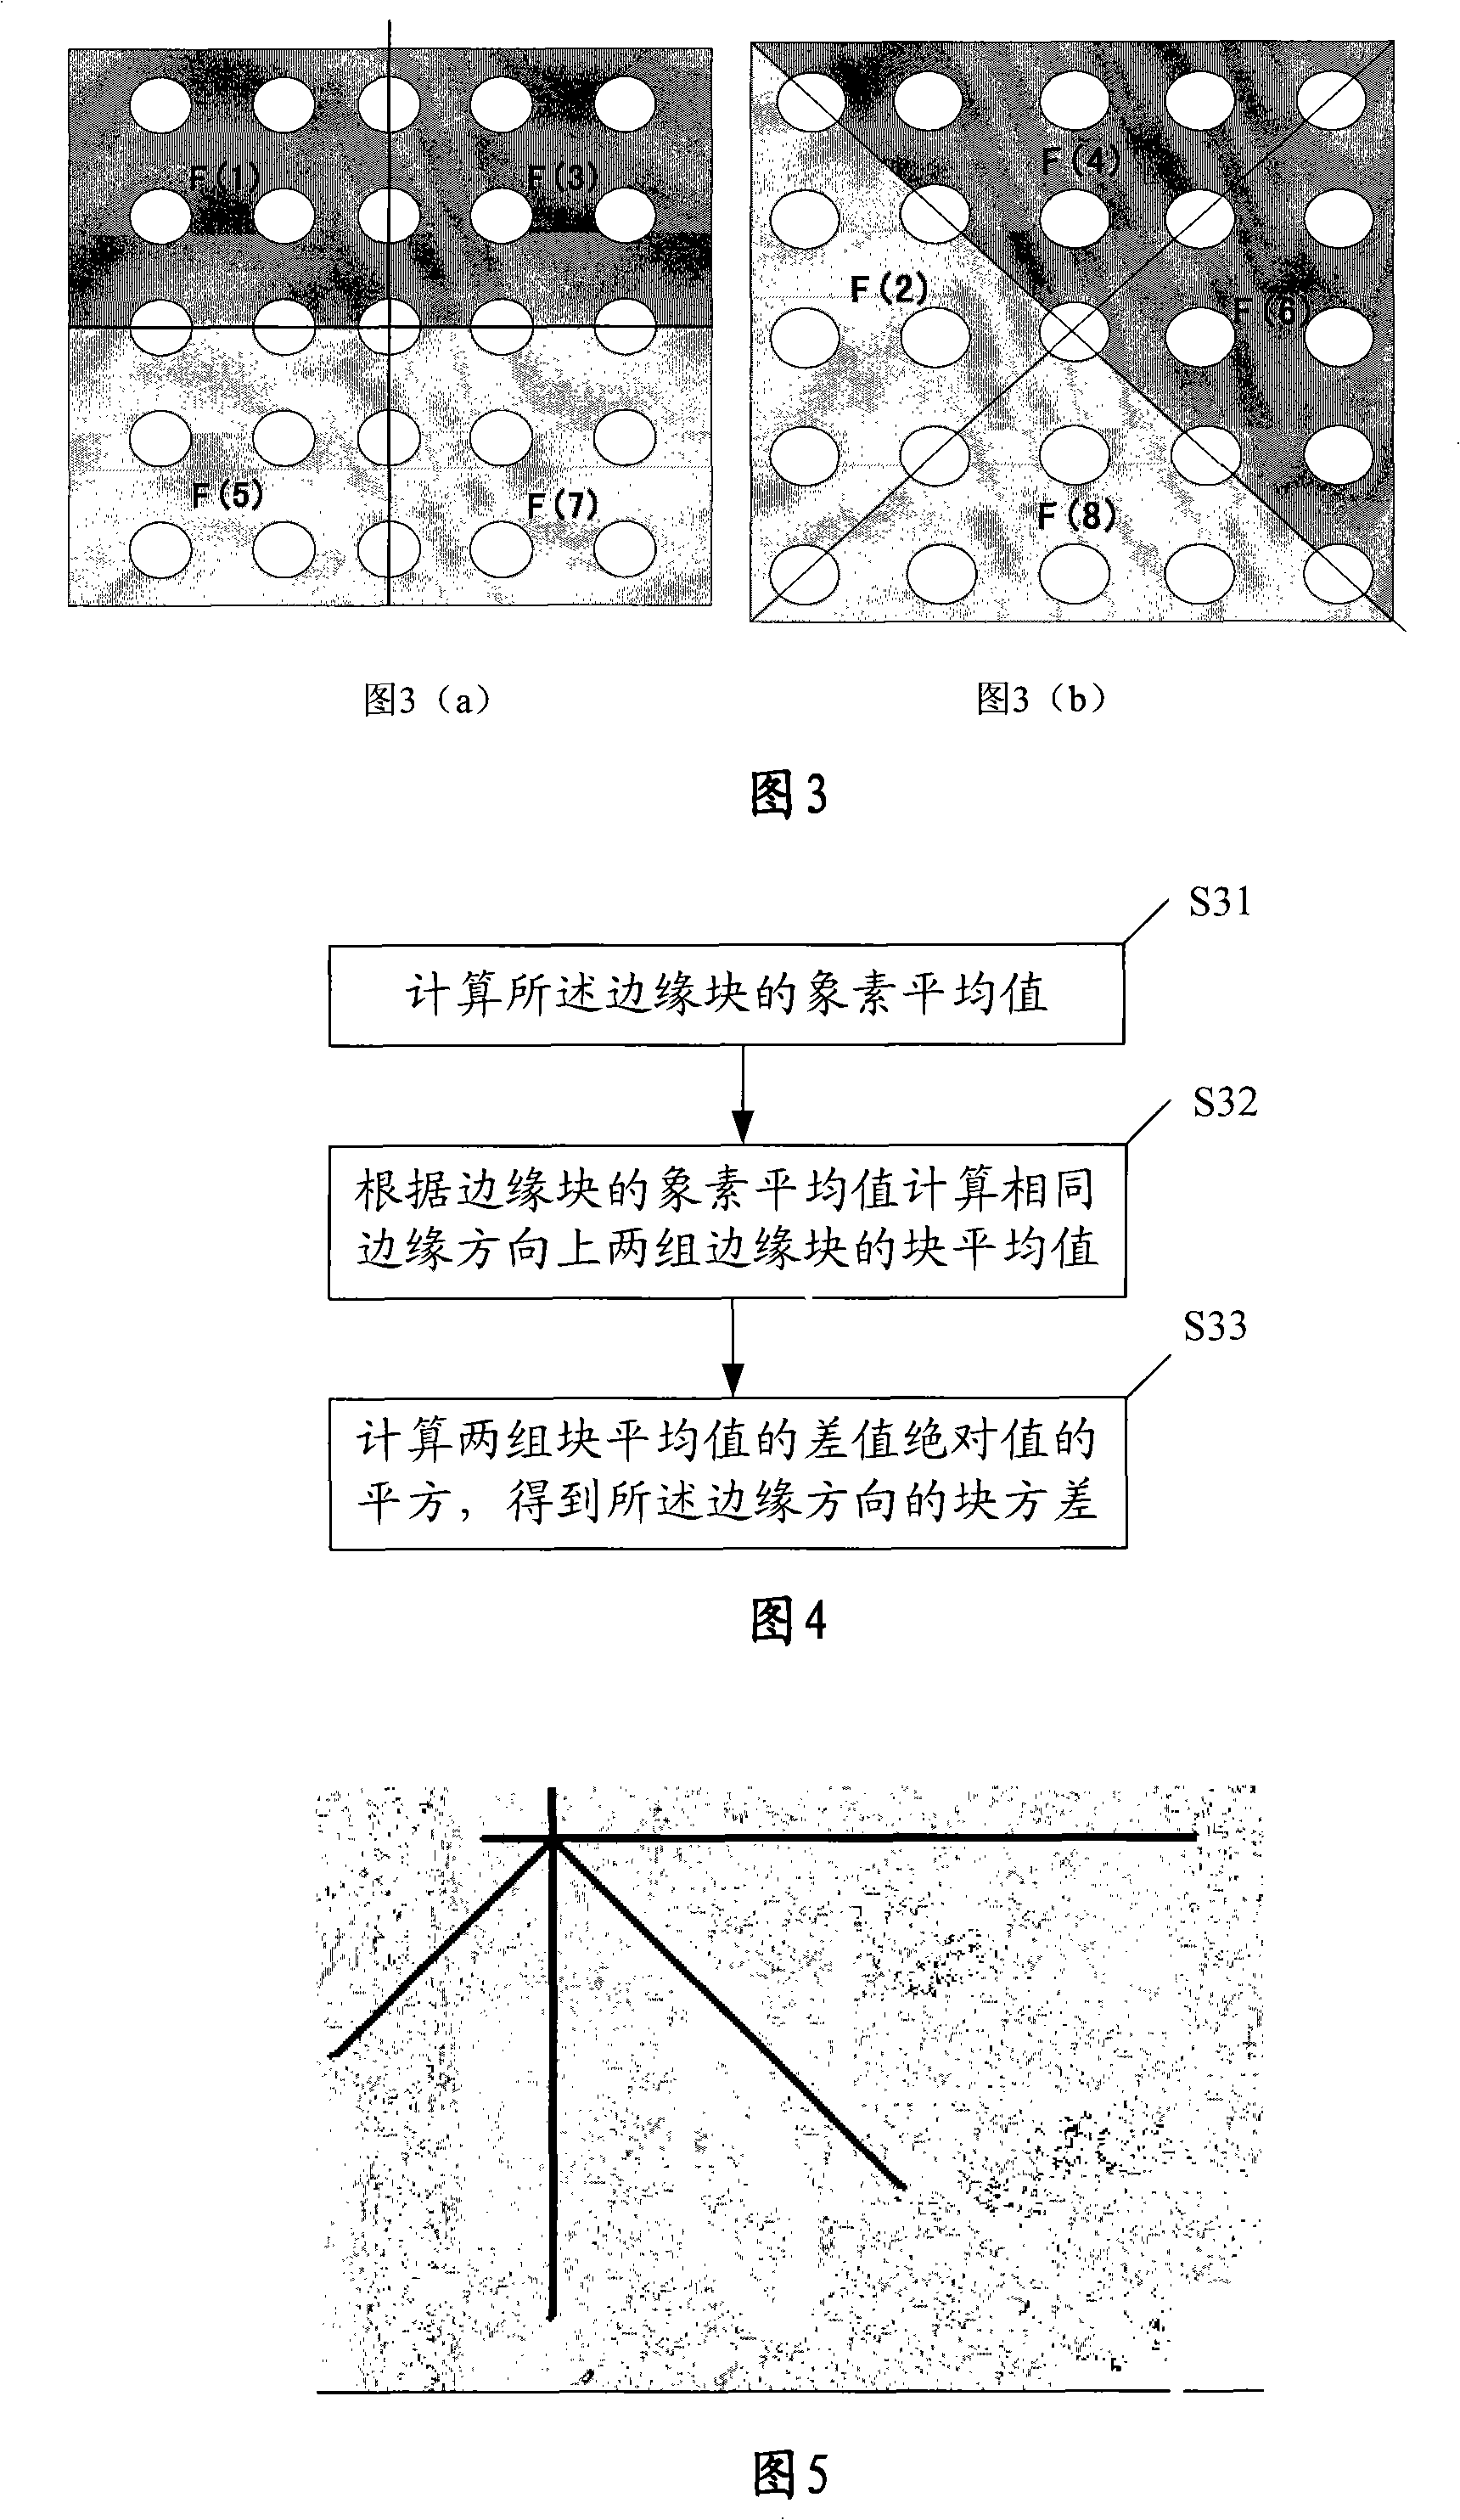 Method and apparatus for detecting edge